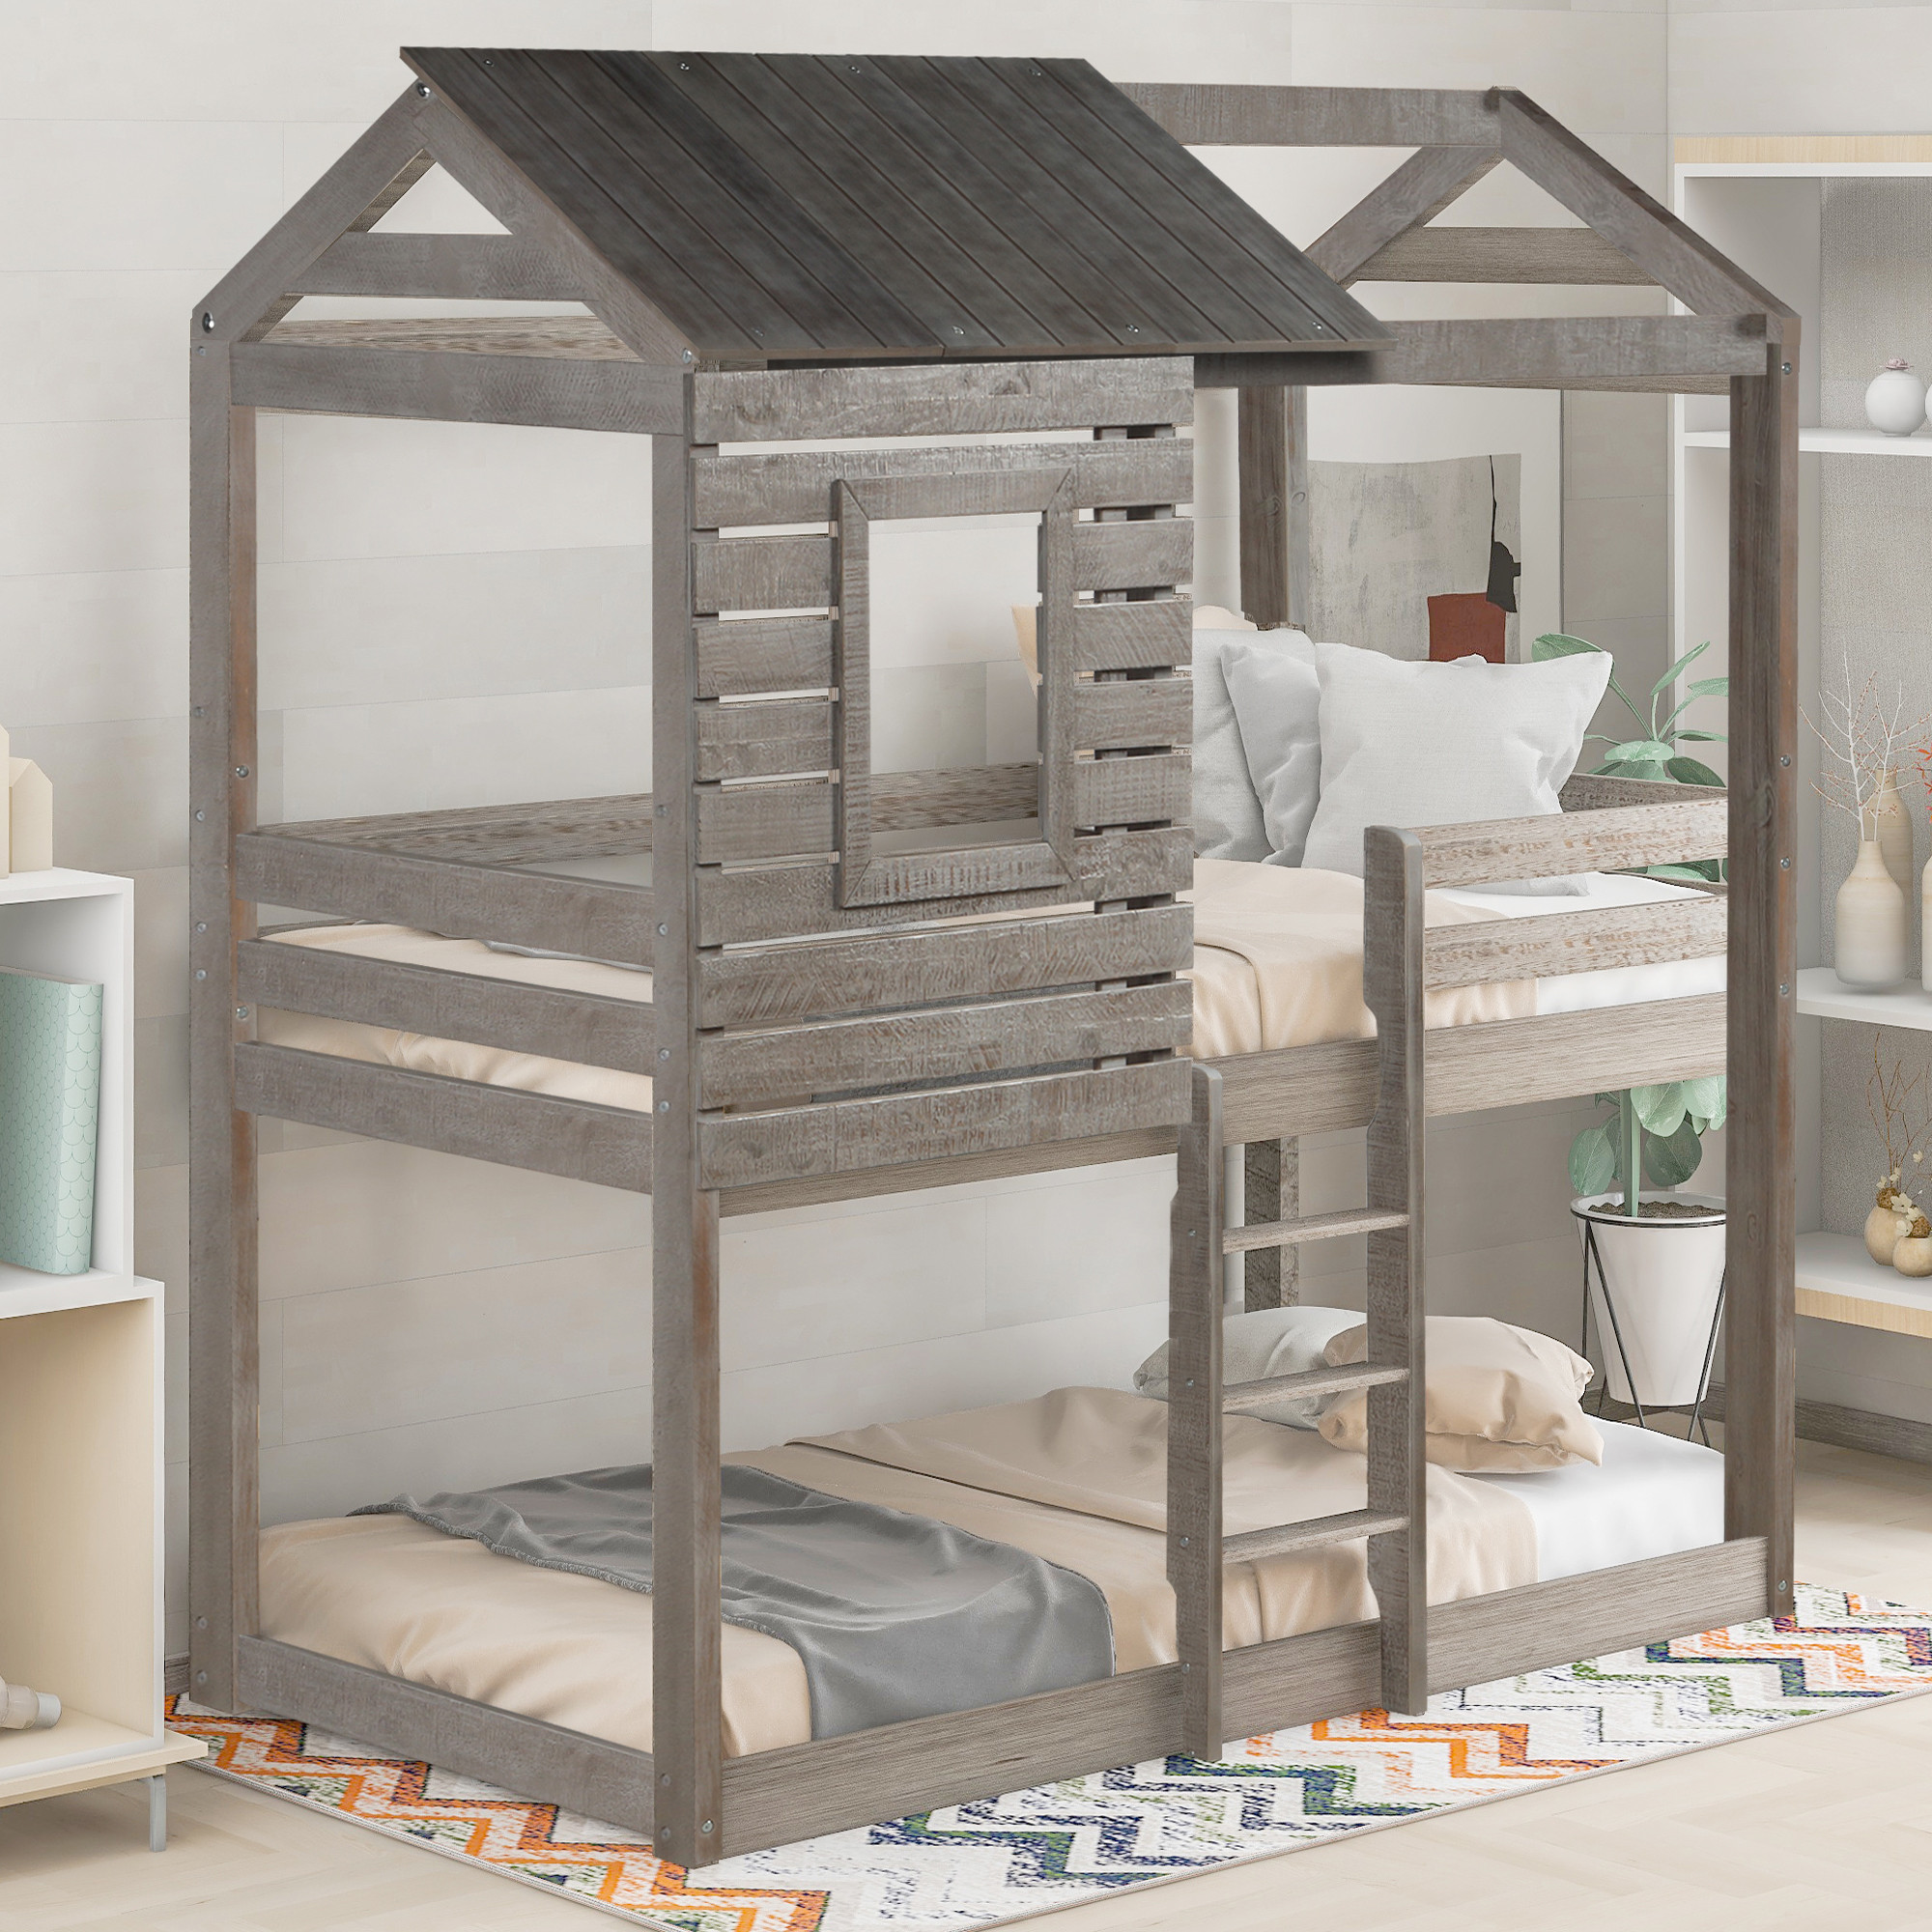 Walmart Kids Bedroom Furniture
 Clearance Twin Over Twin Bunk Bed with Roof Window